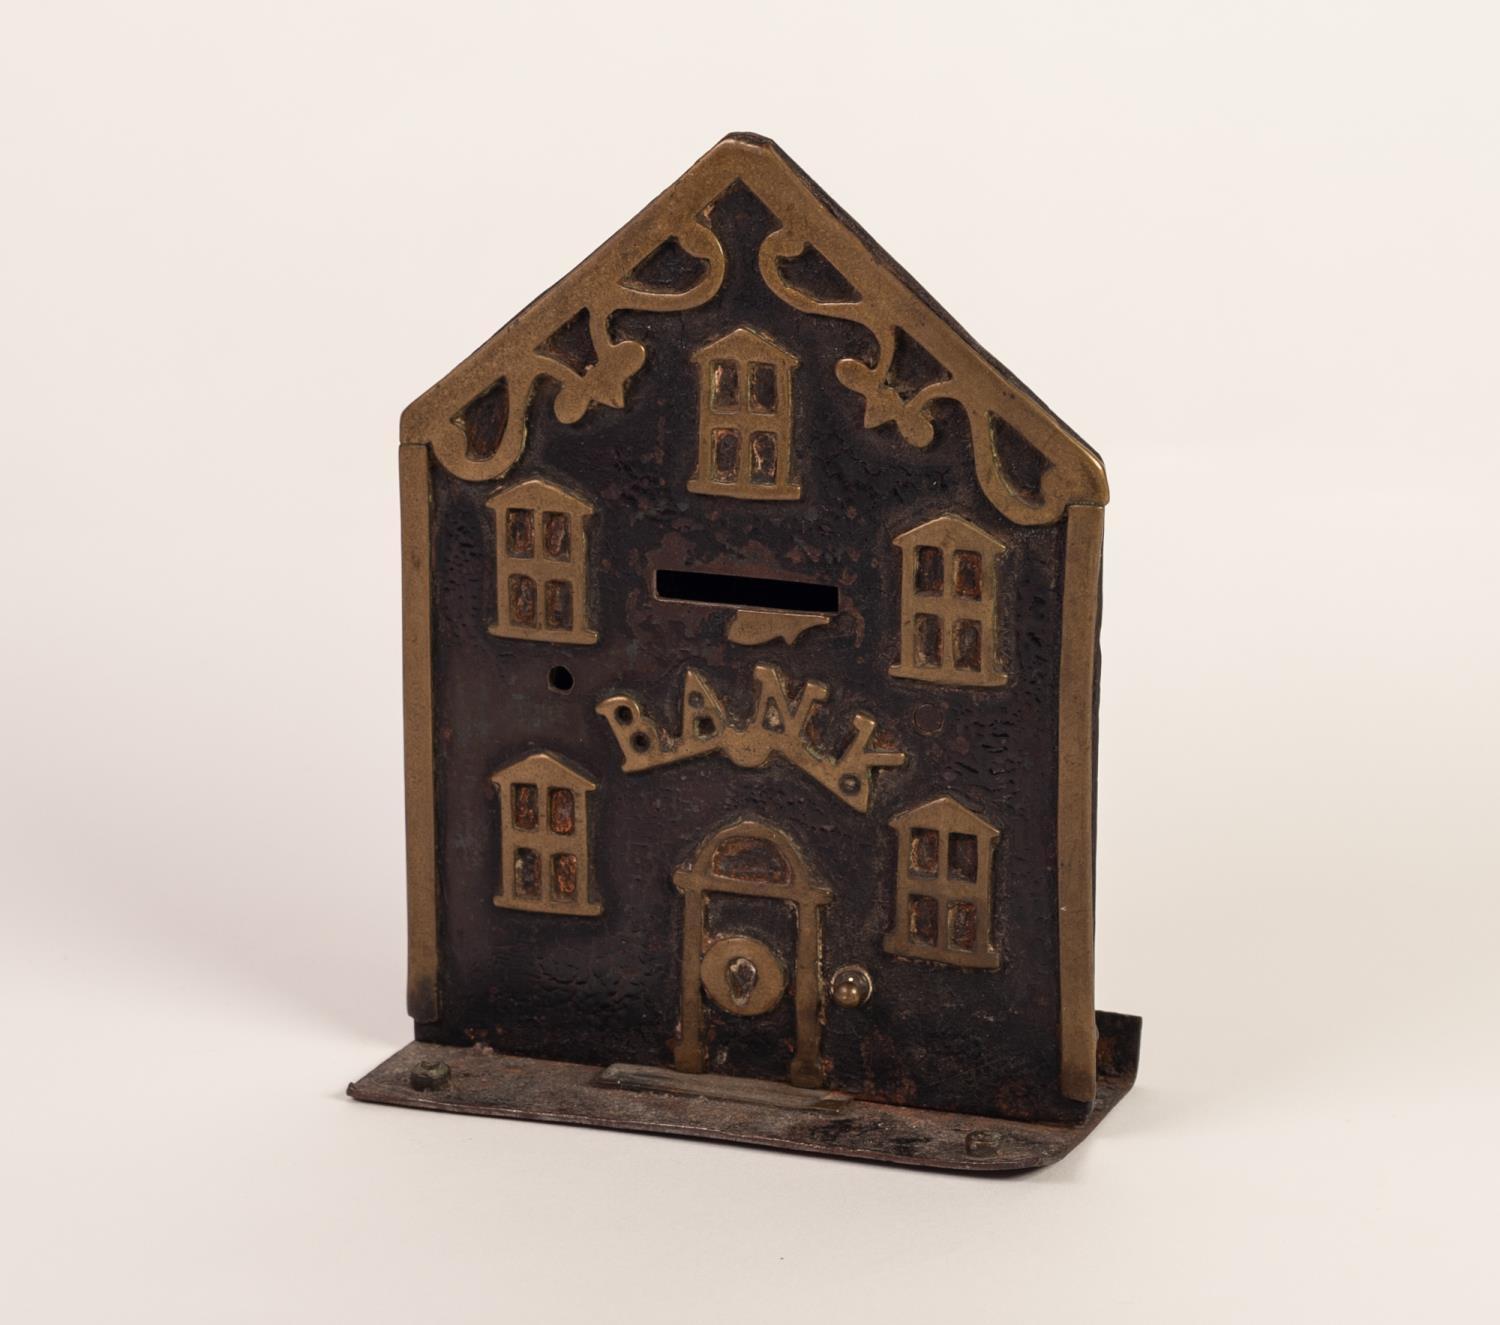 LATE 19th/EARLY 20th CENTURY CAST BRASS AND PLATE METAL MONEY BANK in the form of a bank building